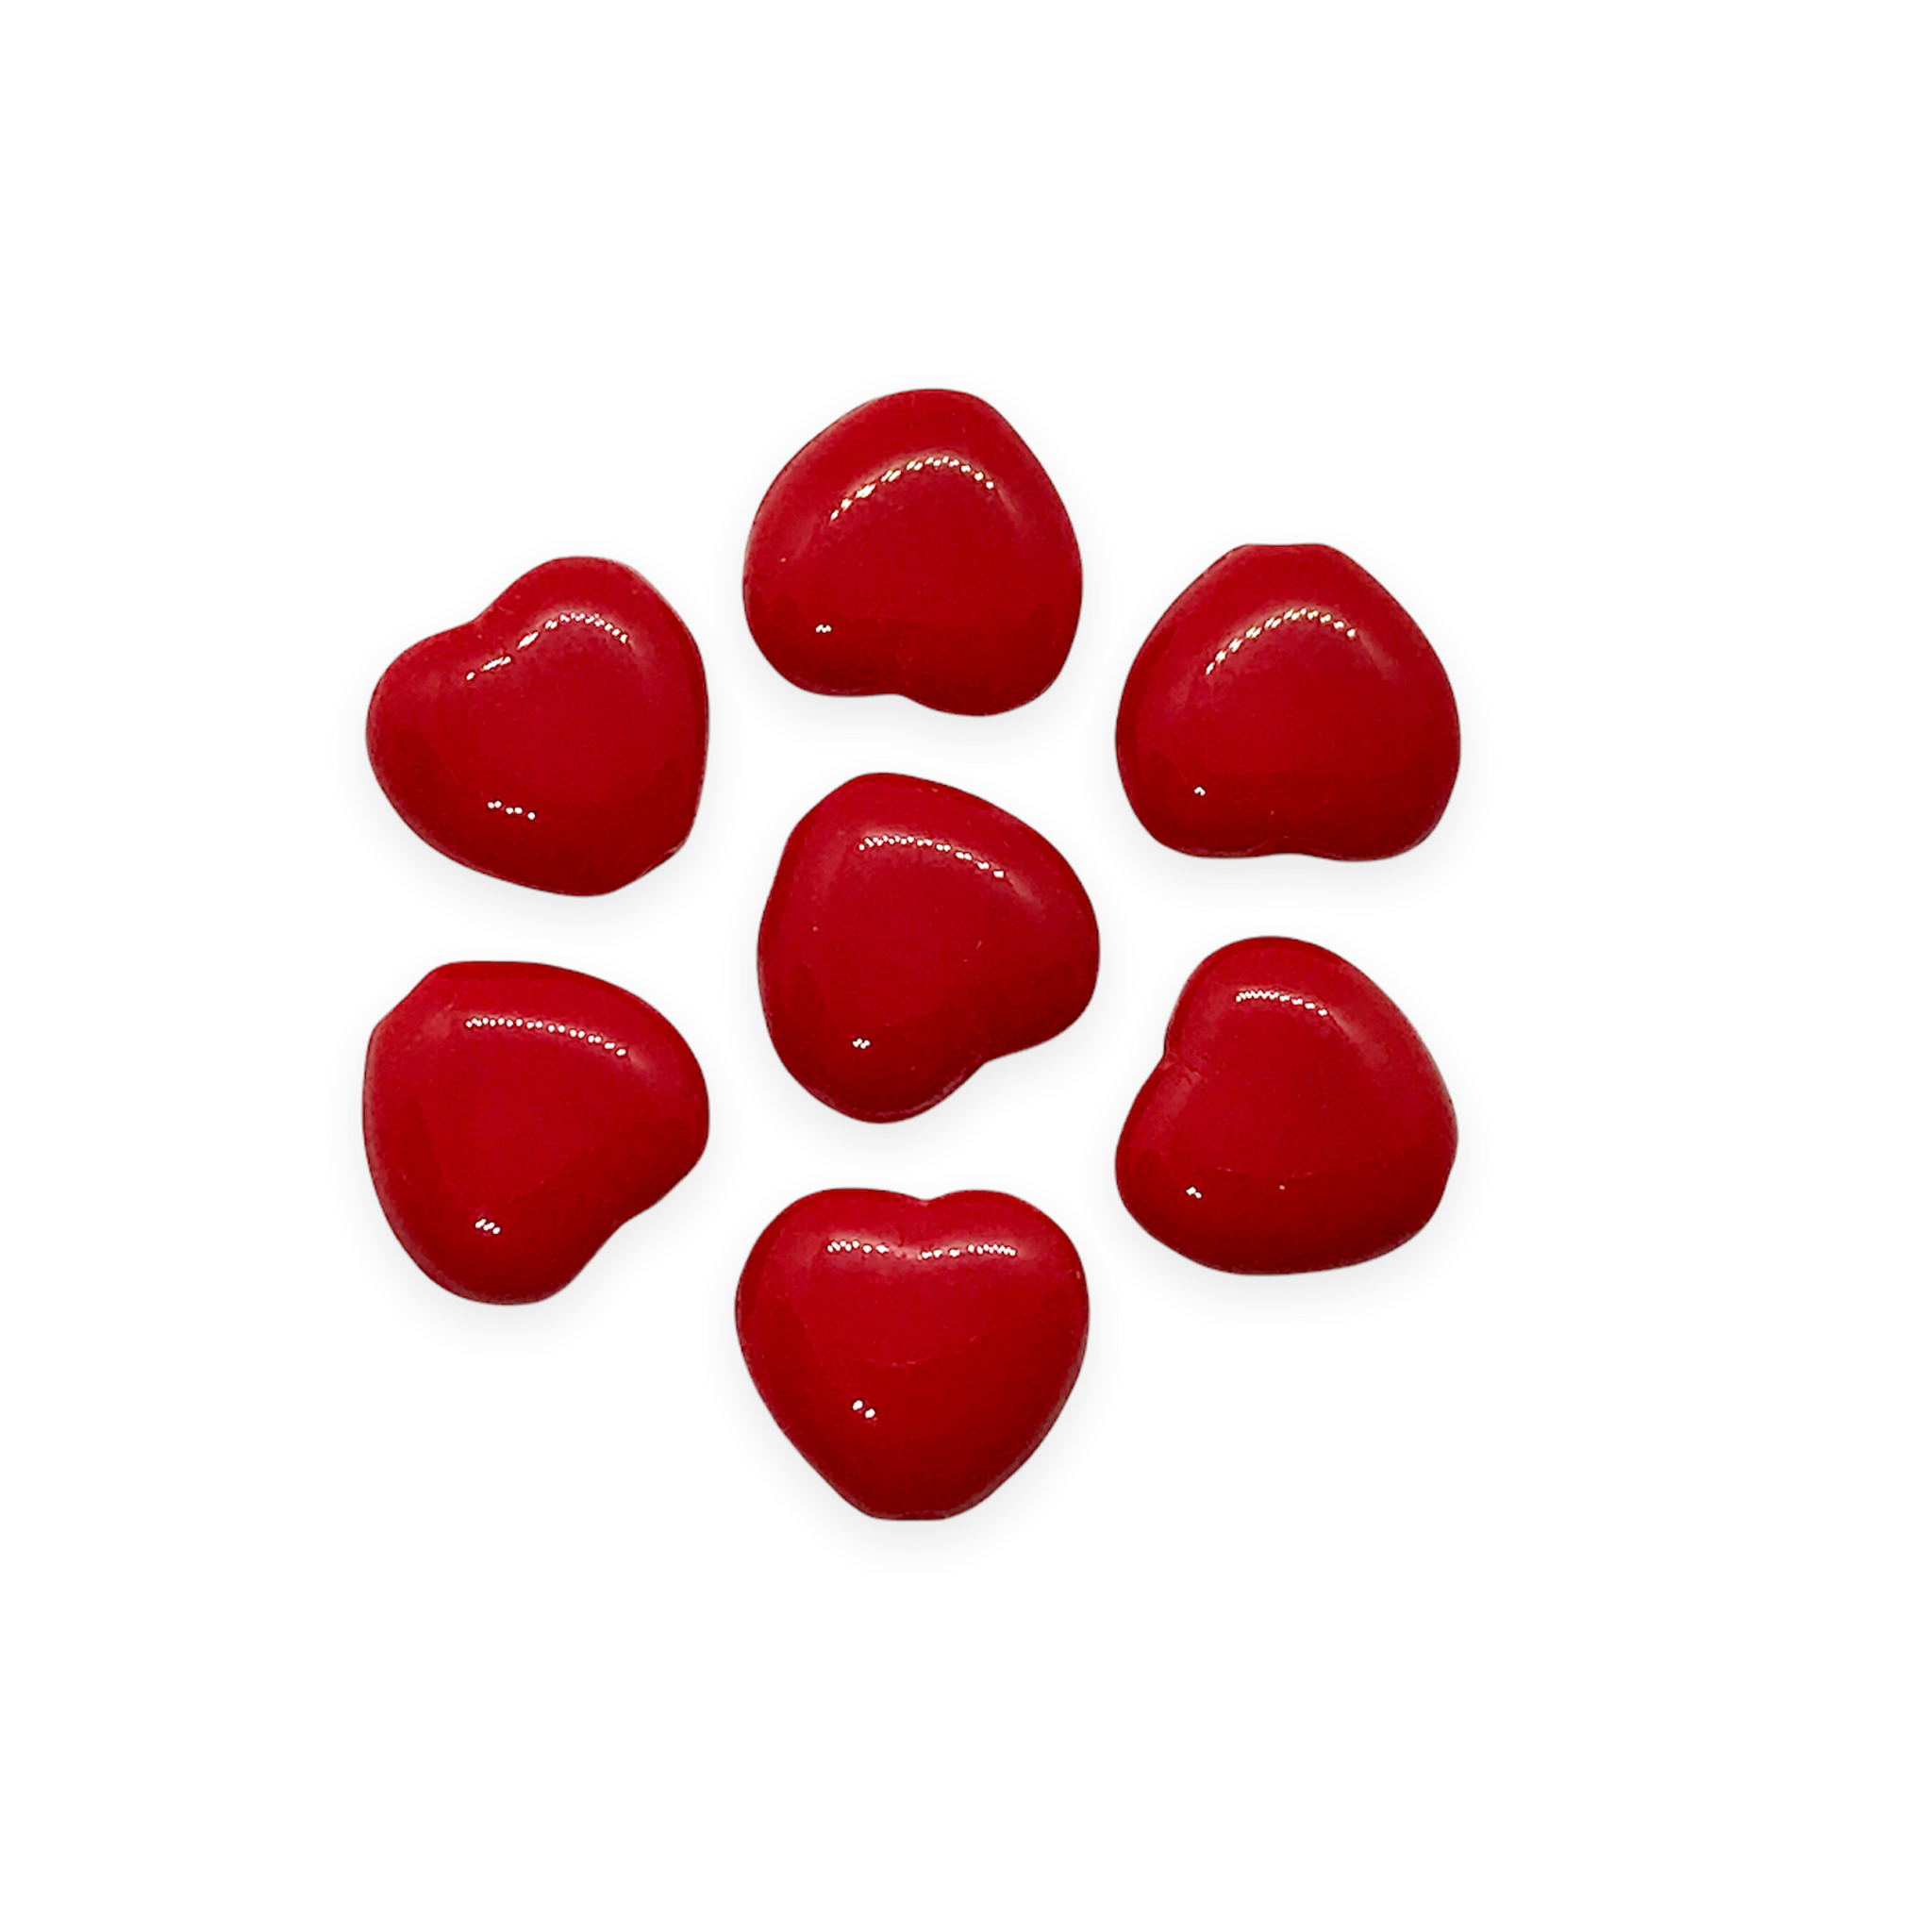 Czech glass Valentine heart beads 30pc classic opaque red 8mm